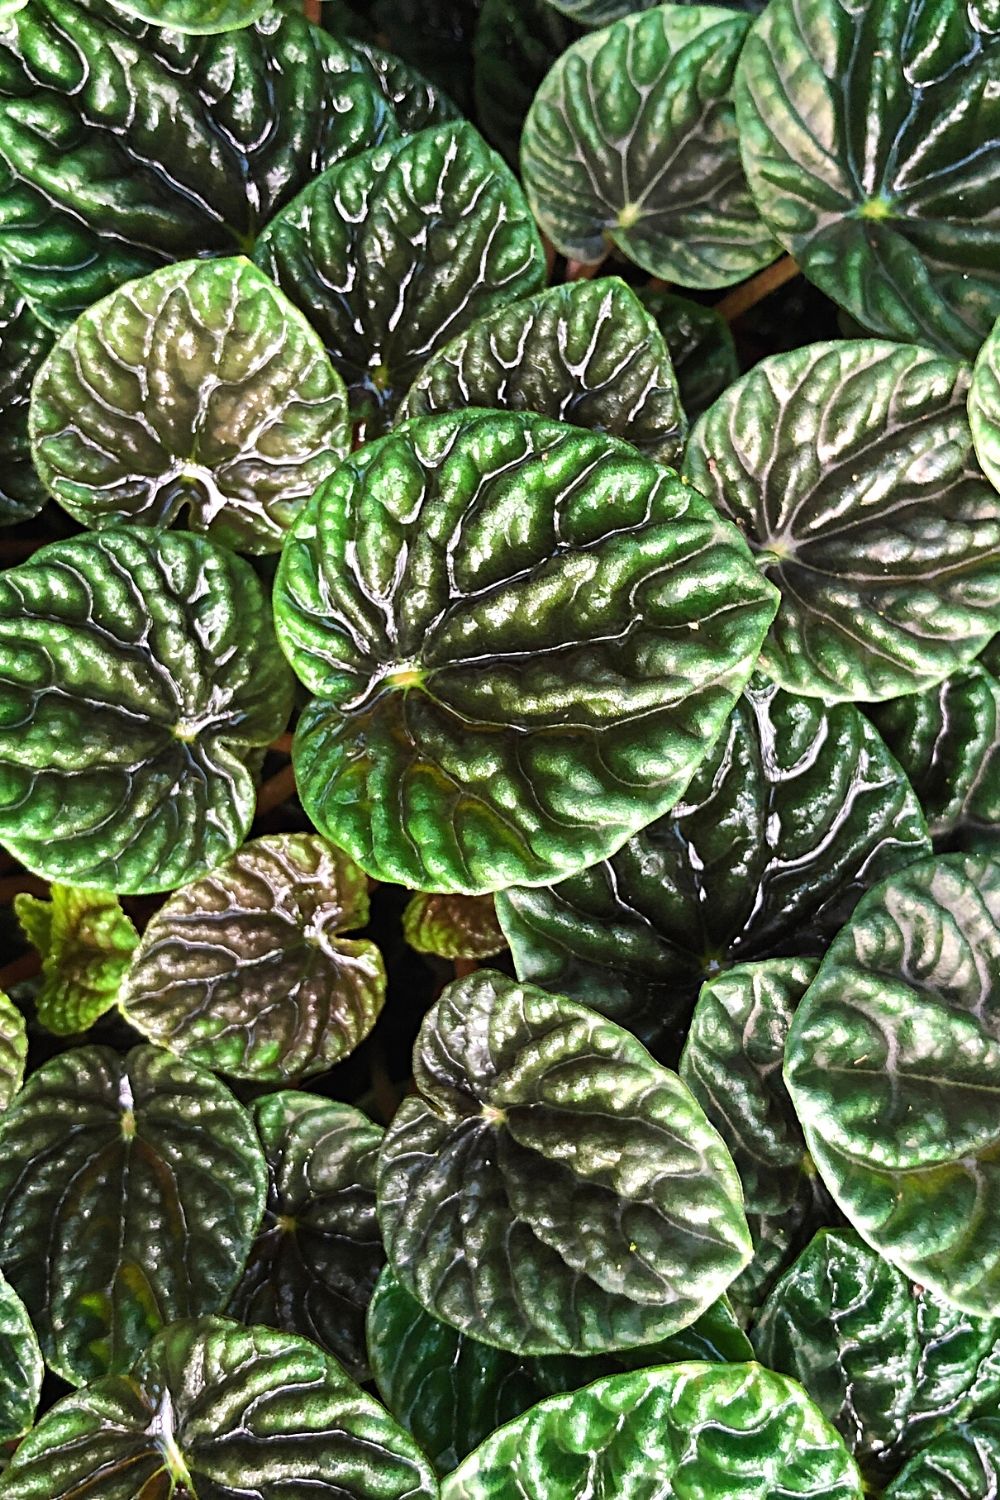 The wrinkled, dark green foliage of the Emerald ripple peperomia will beautify any terrarium you have in your home